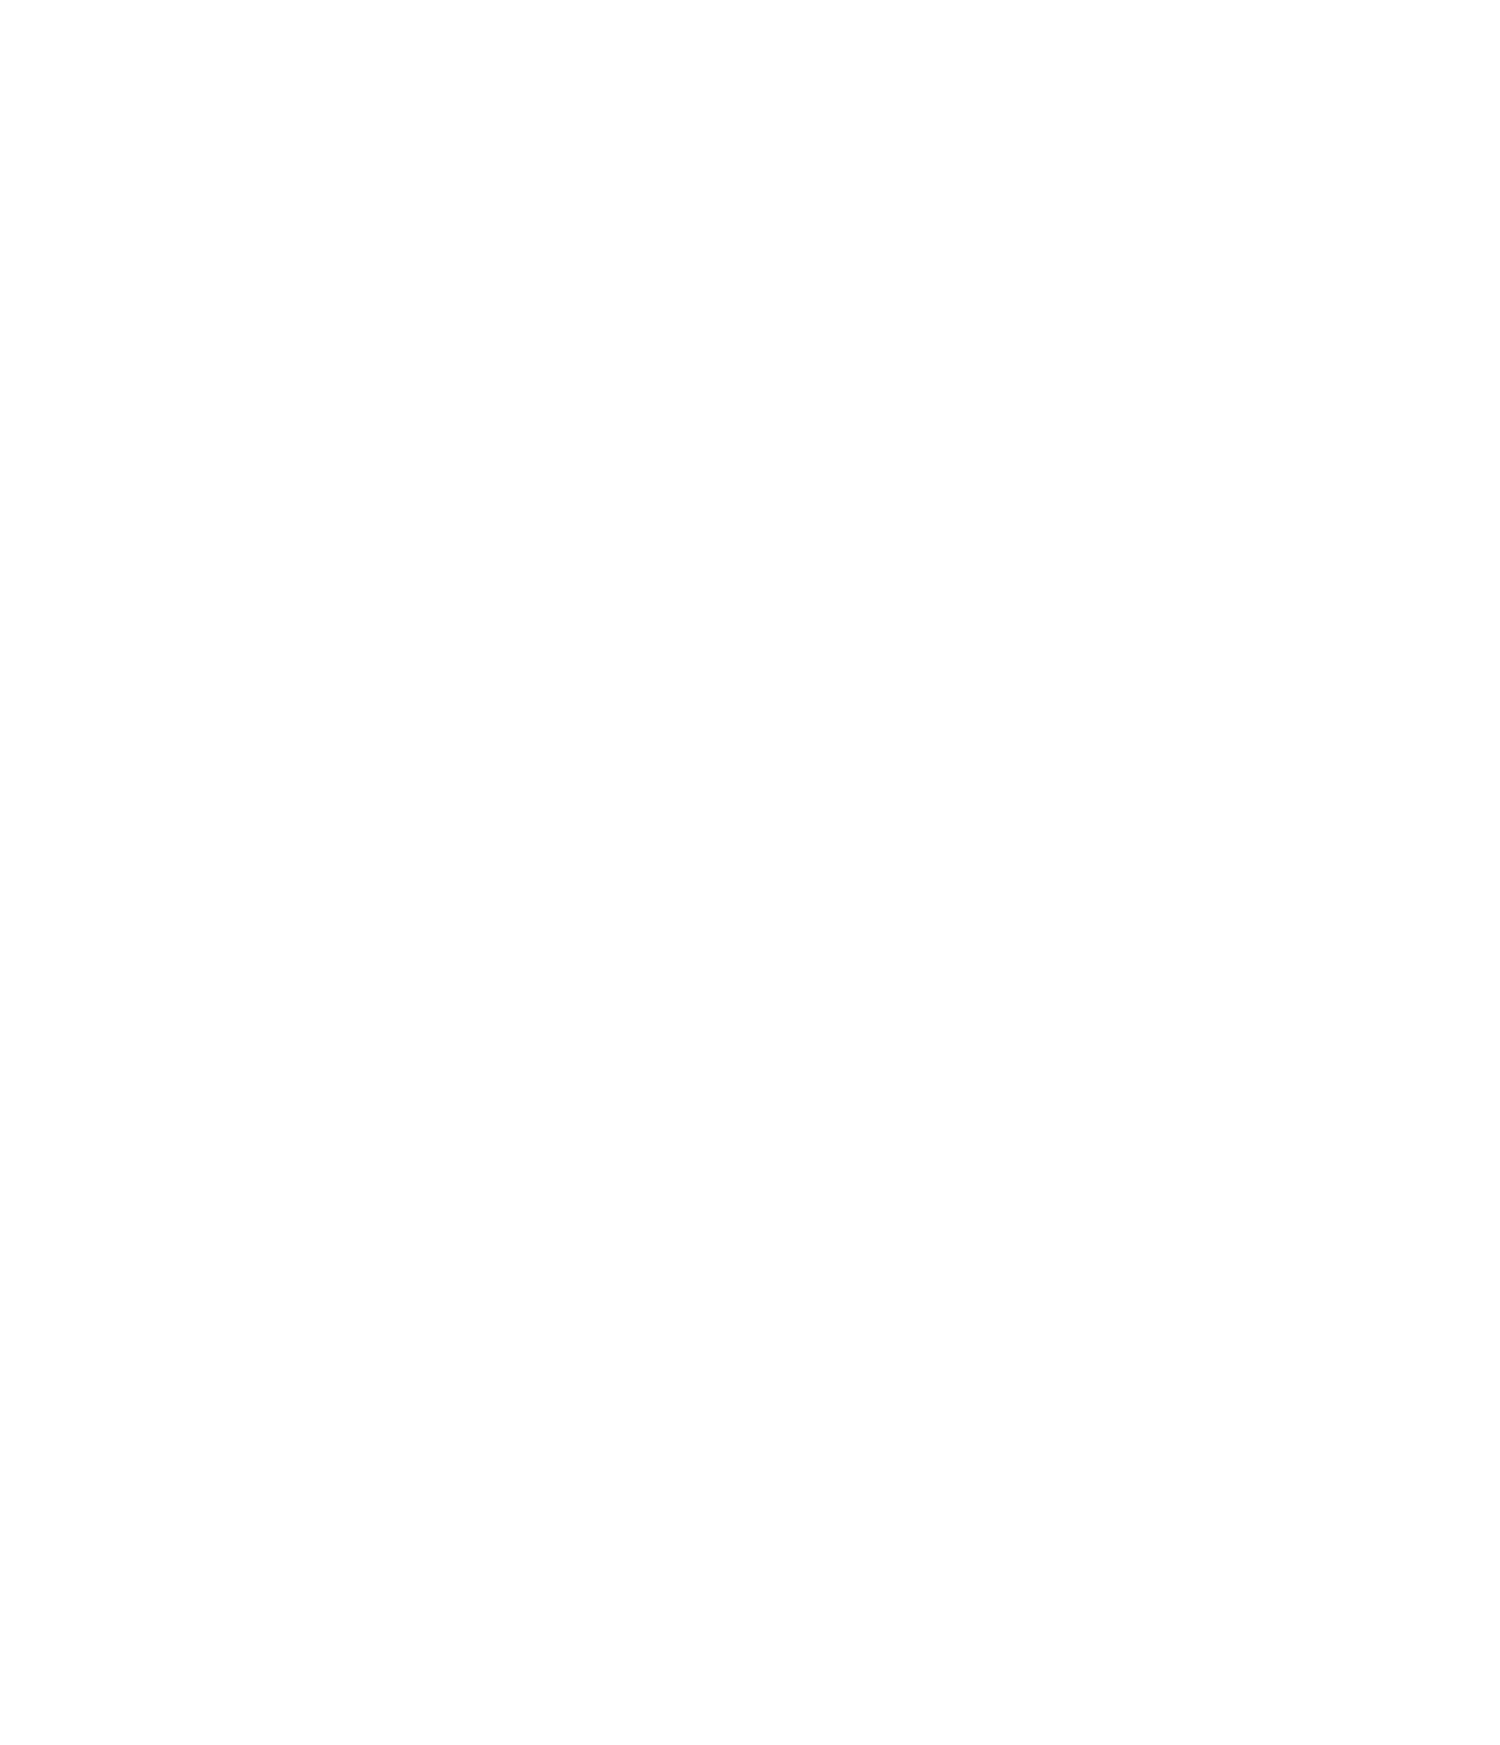 Madelines Movement